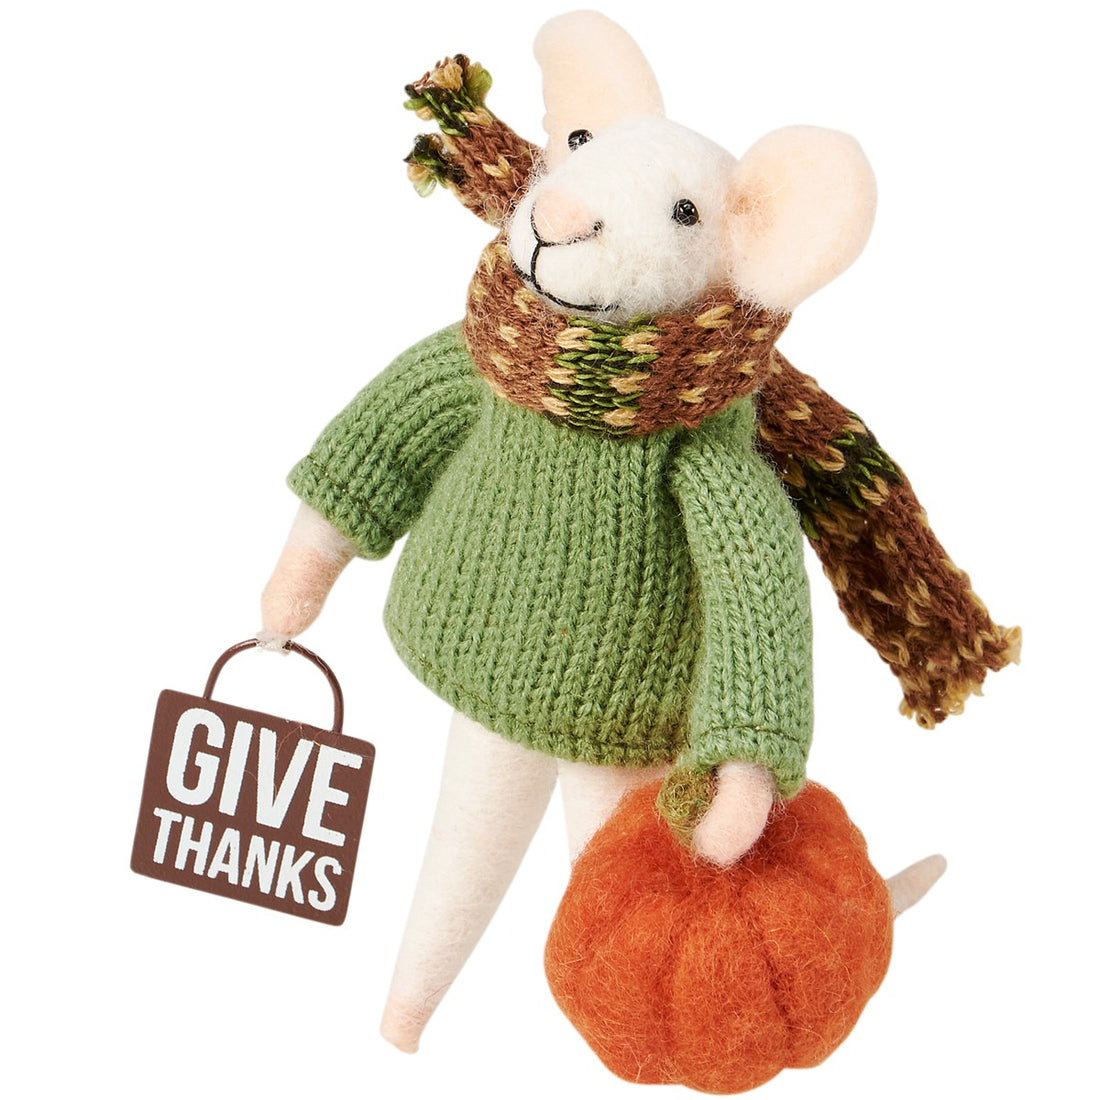 Primitive Country Felt Give Thanks Mouse Ornament